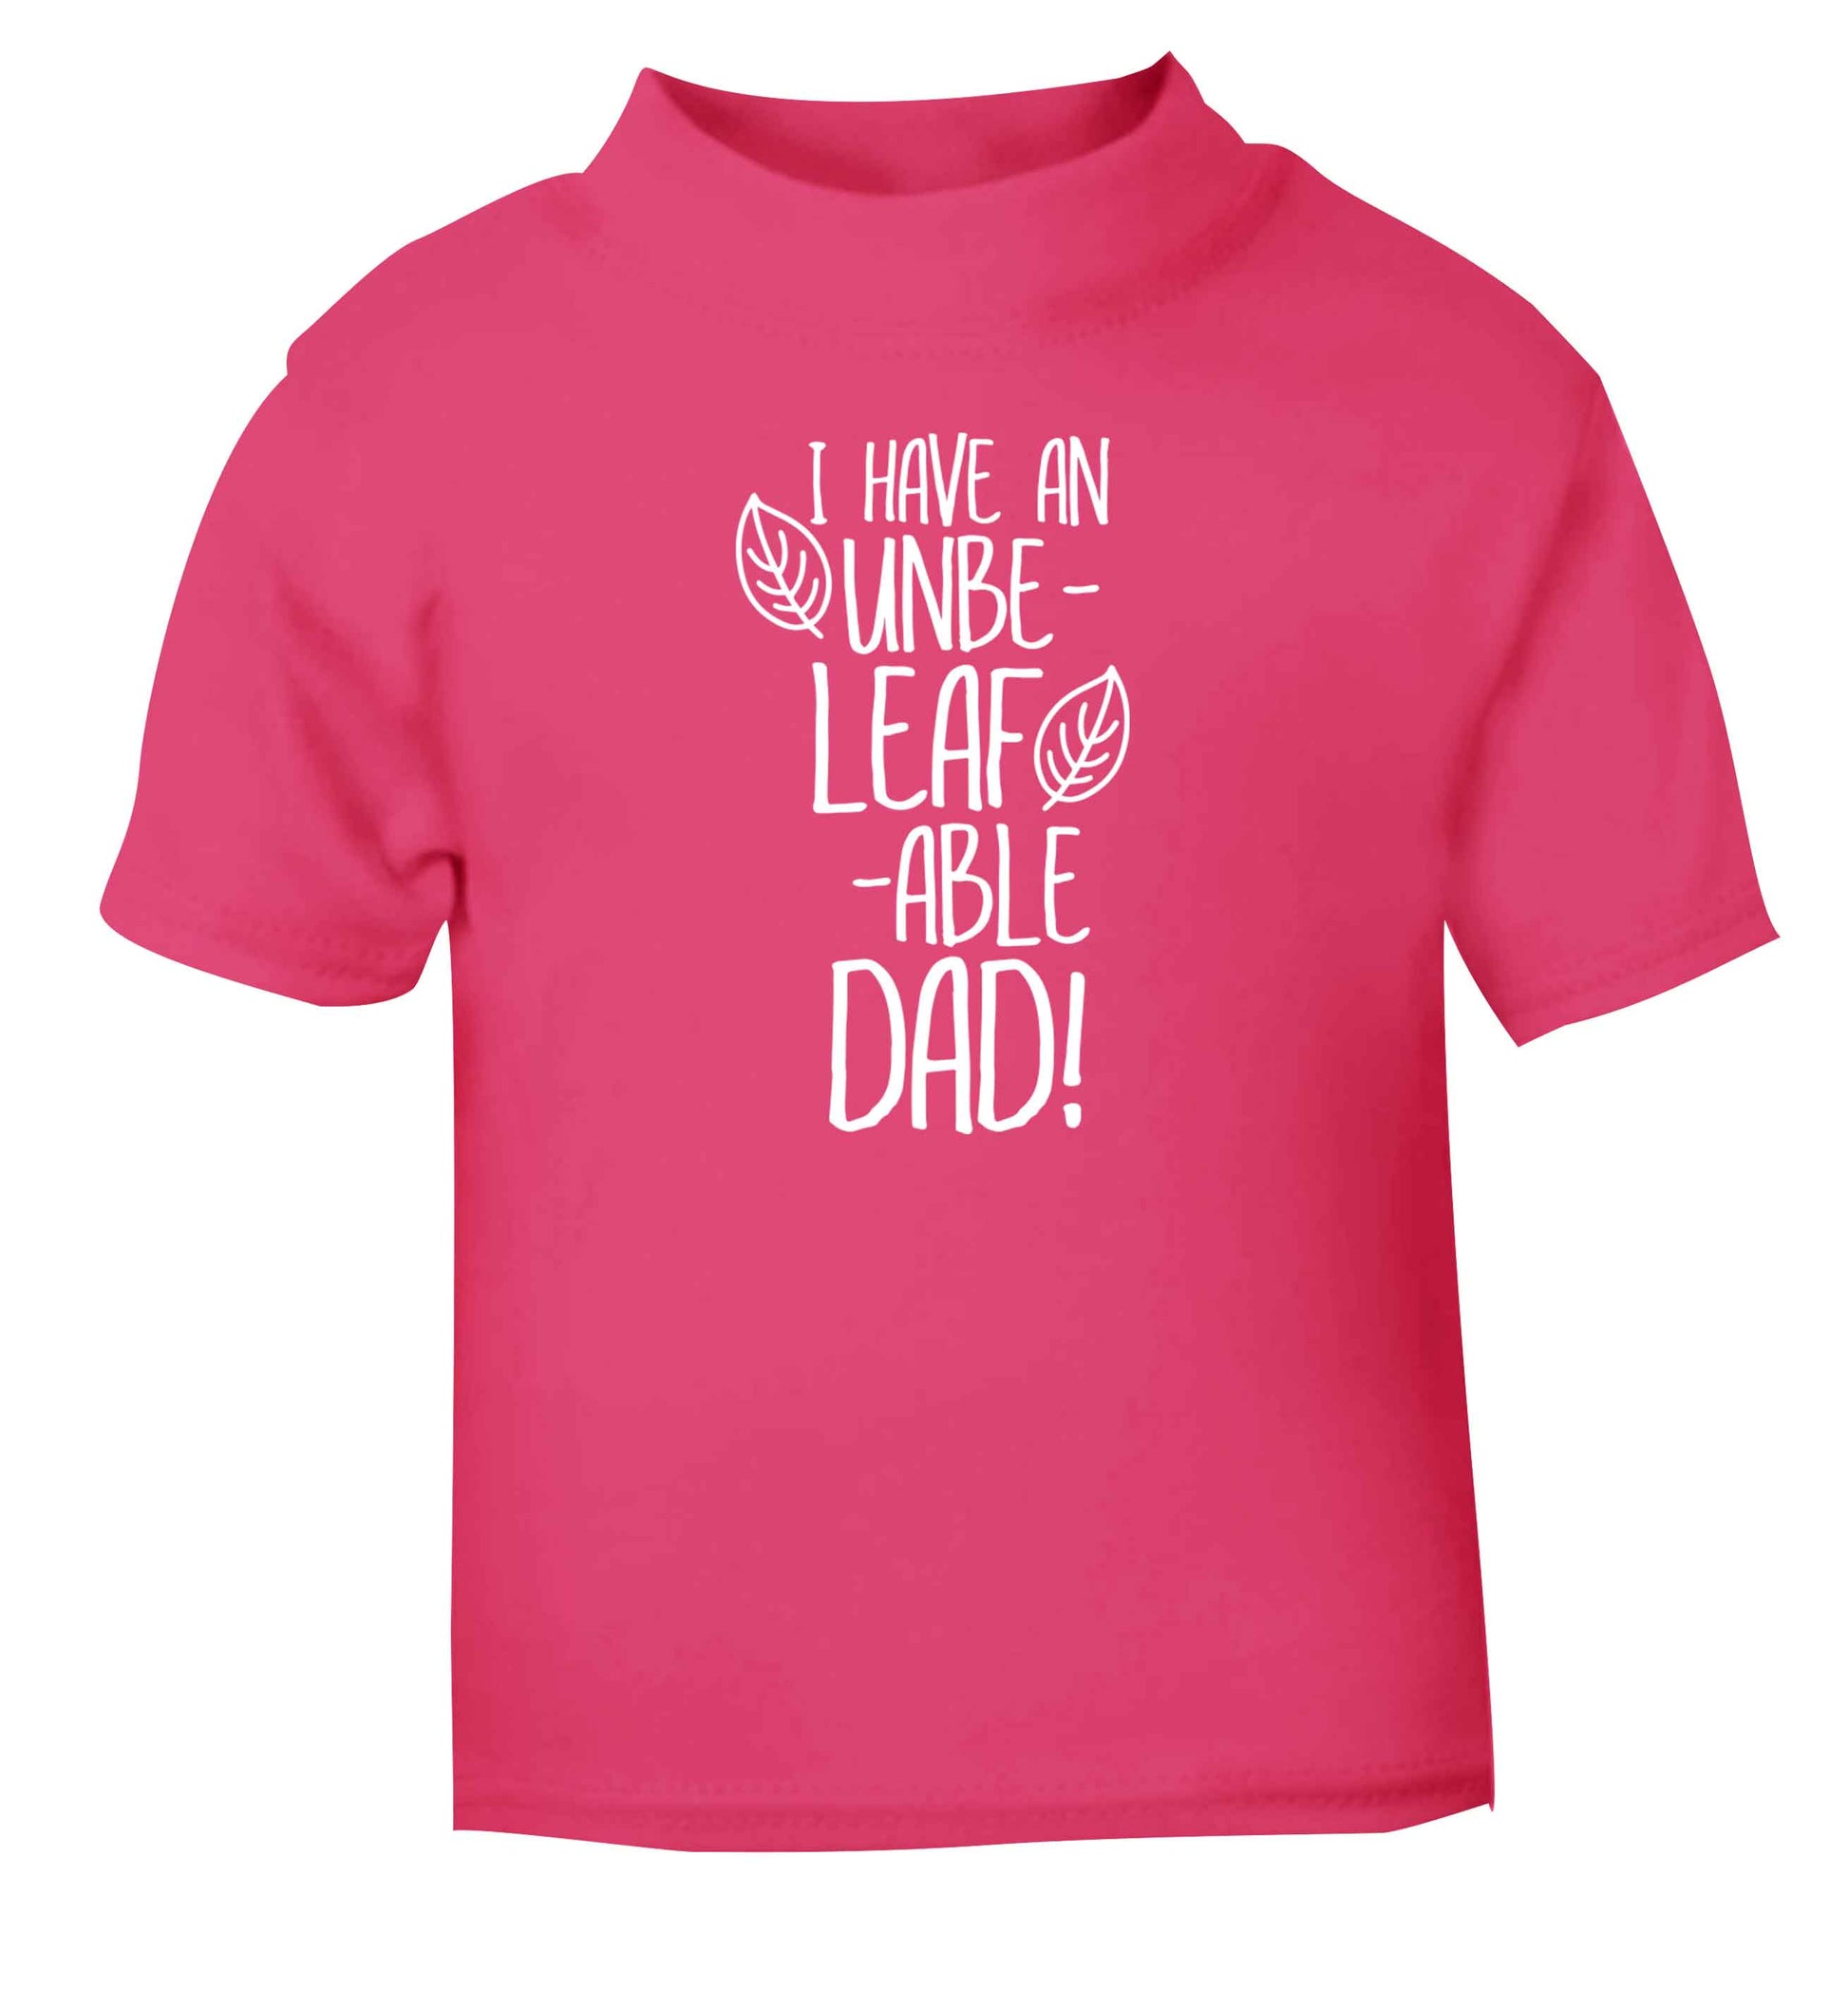 I have an unbe-leaf-able dad pink Baby Toddler Tshirt 2 Years